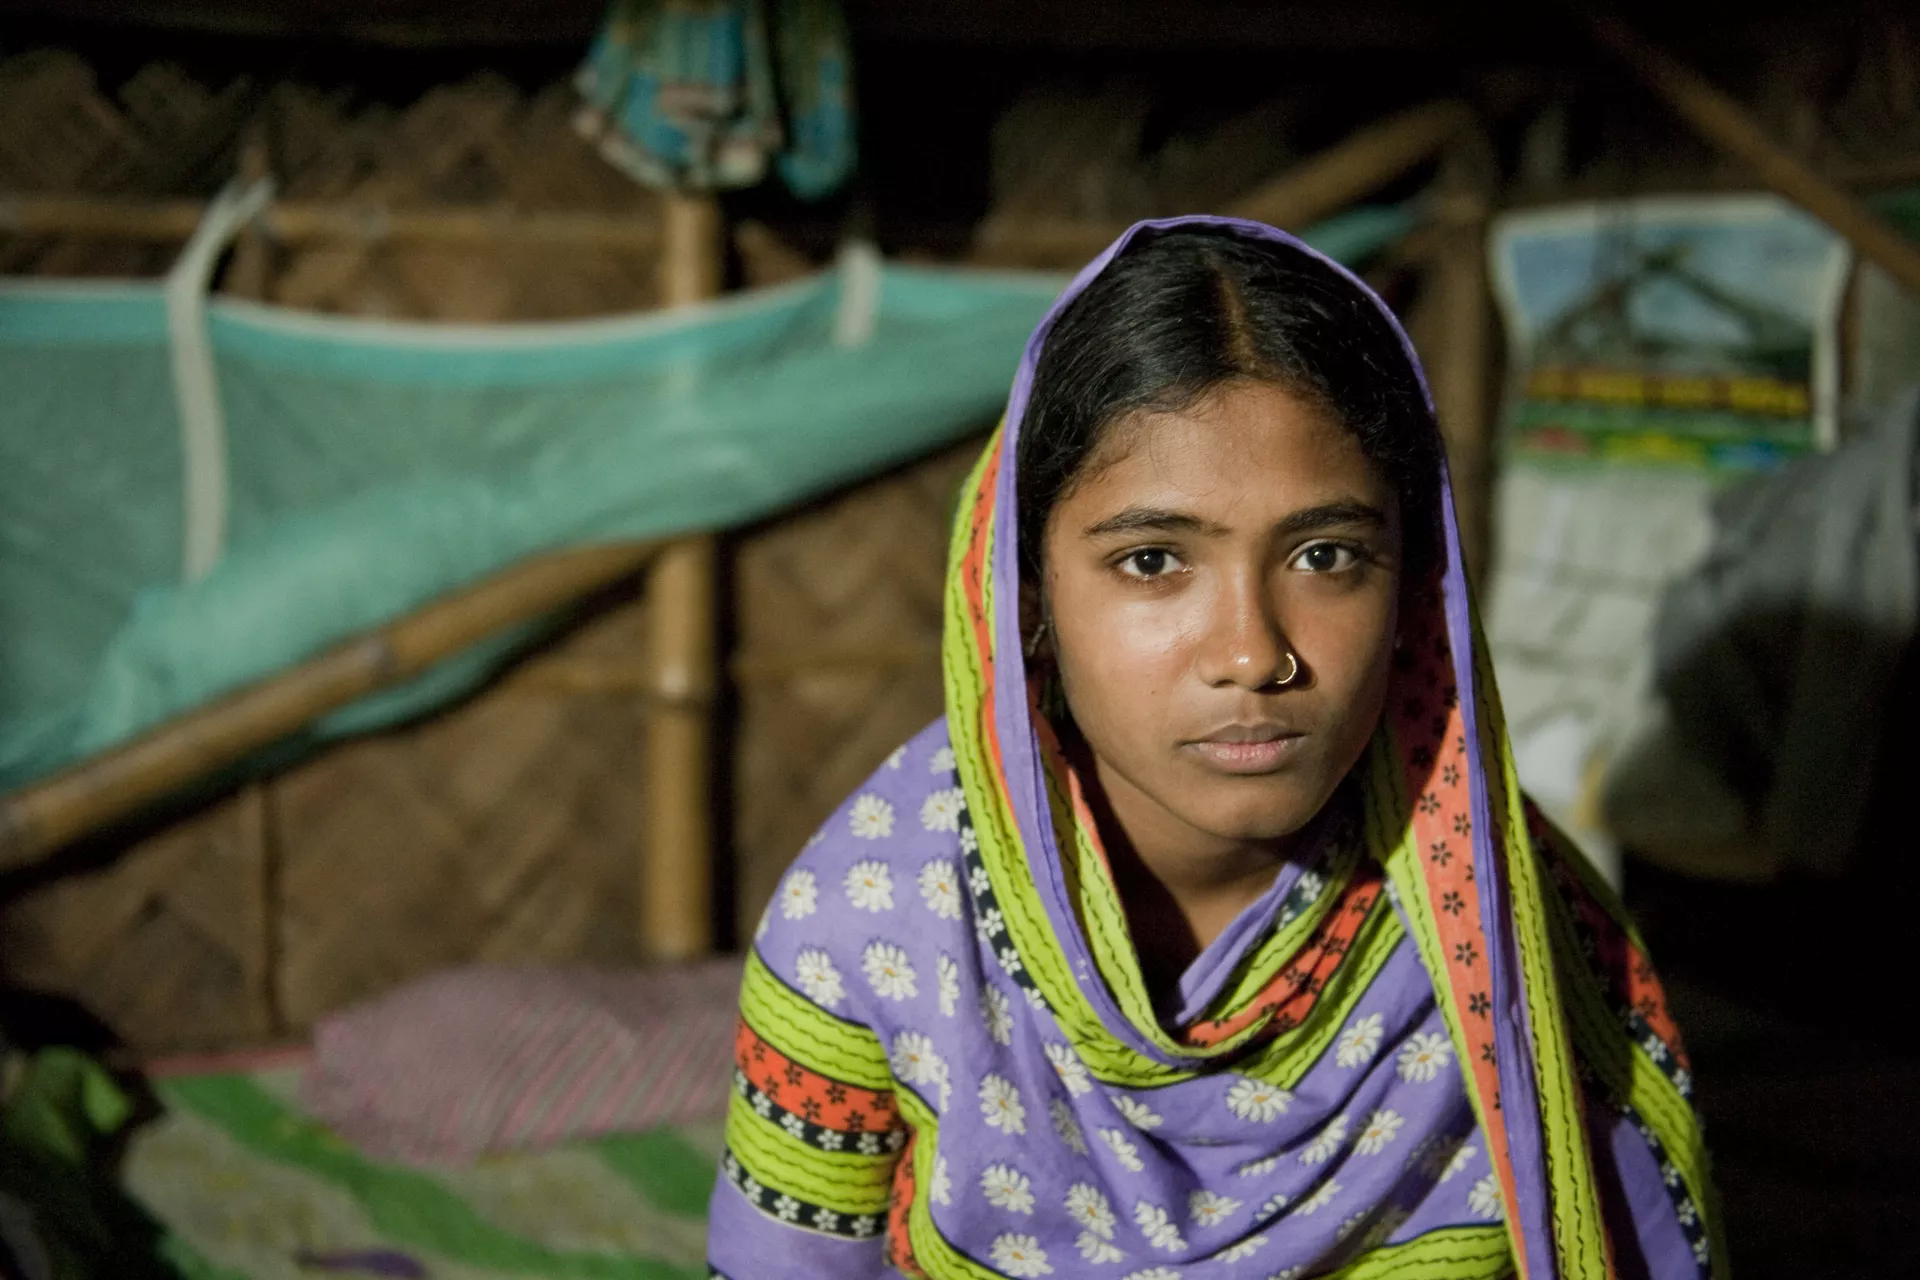 Fatema, 15, in Bangladesh was saved from marriage